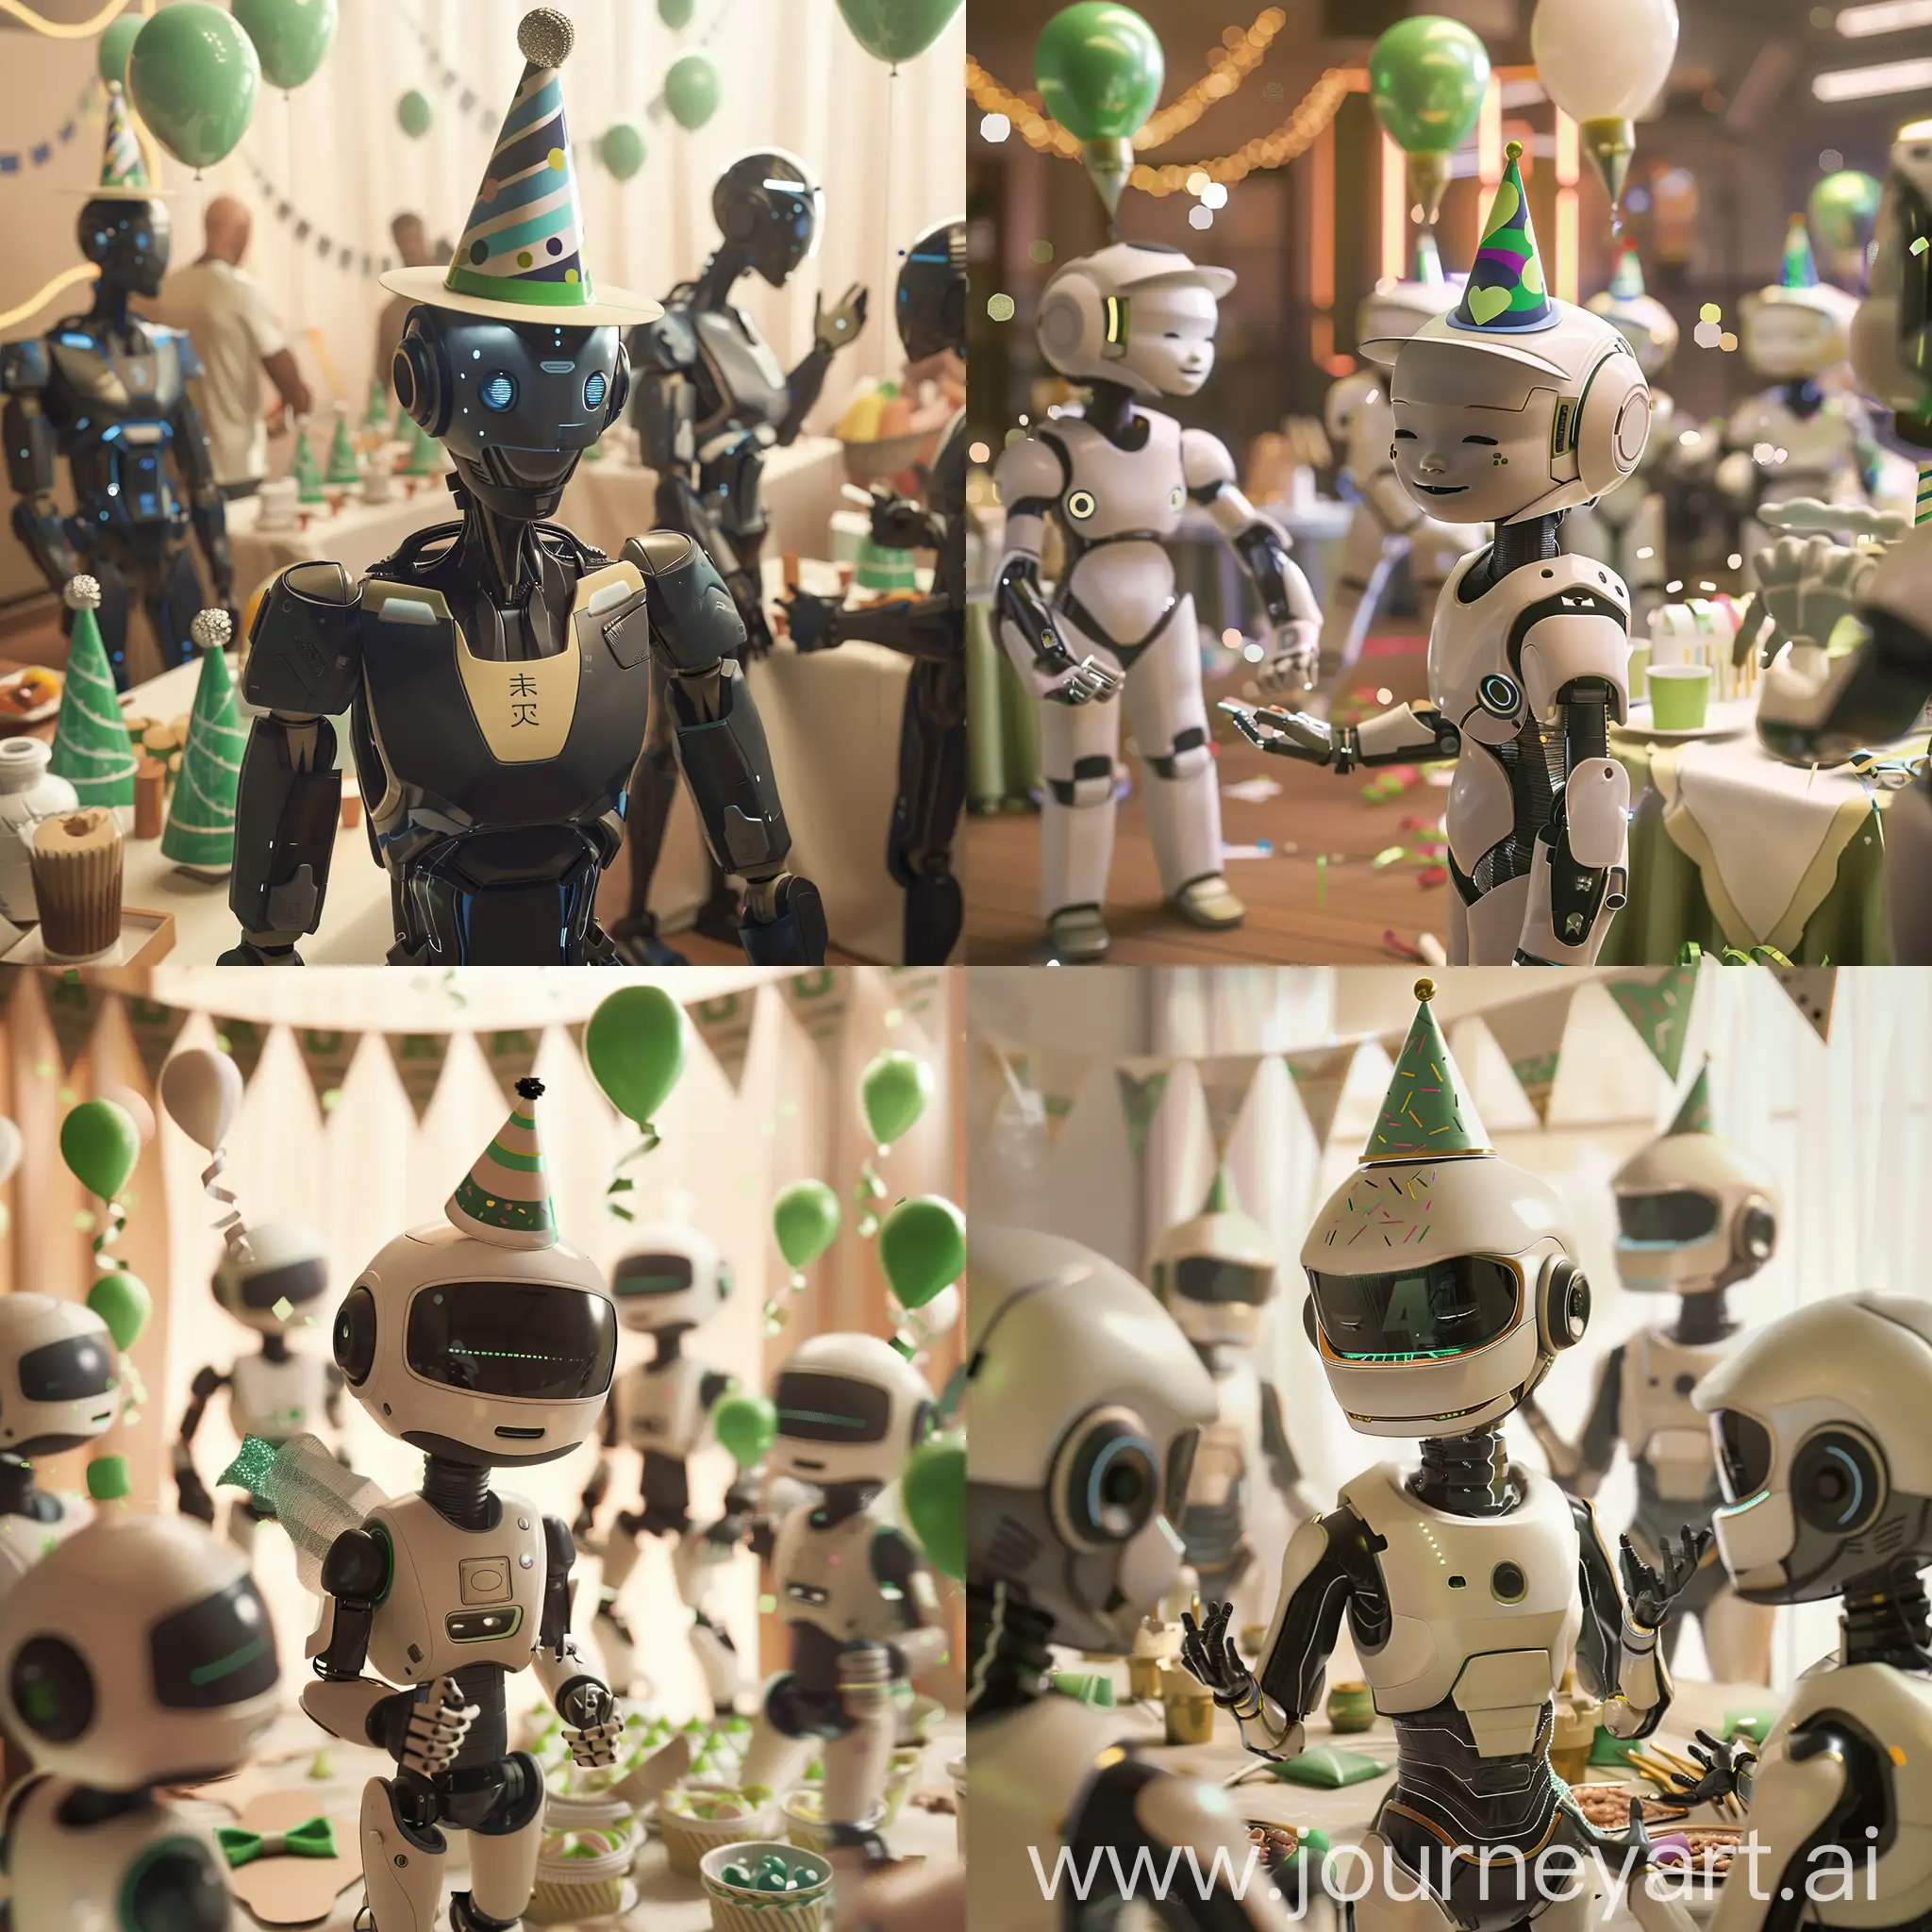 AI-Celebrating-Day-with-Friends-at-Cream-and-Green-Party